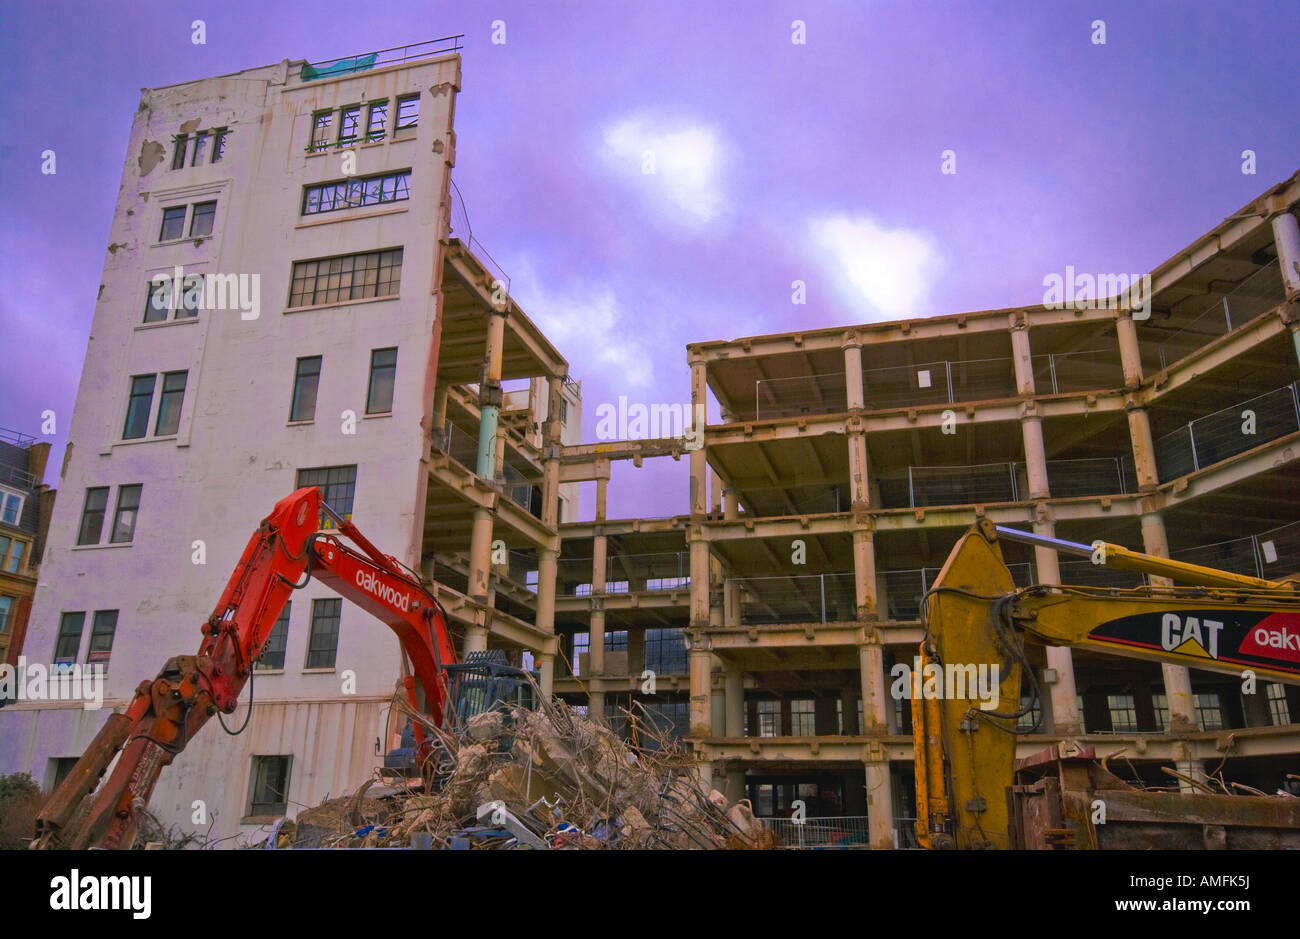 A Building being demolished using heavy machinery in London 1 of 2 Stock Photo